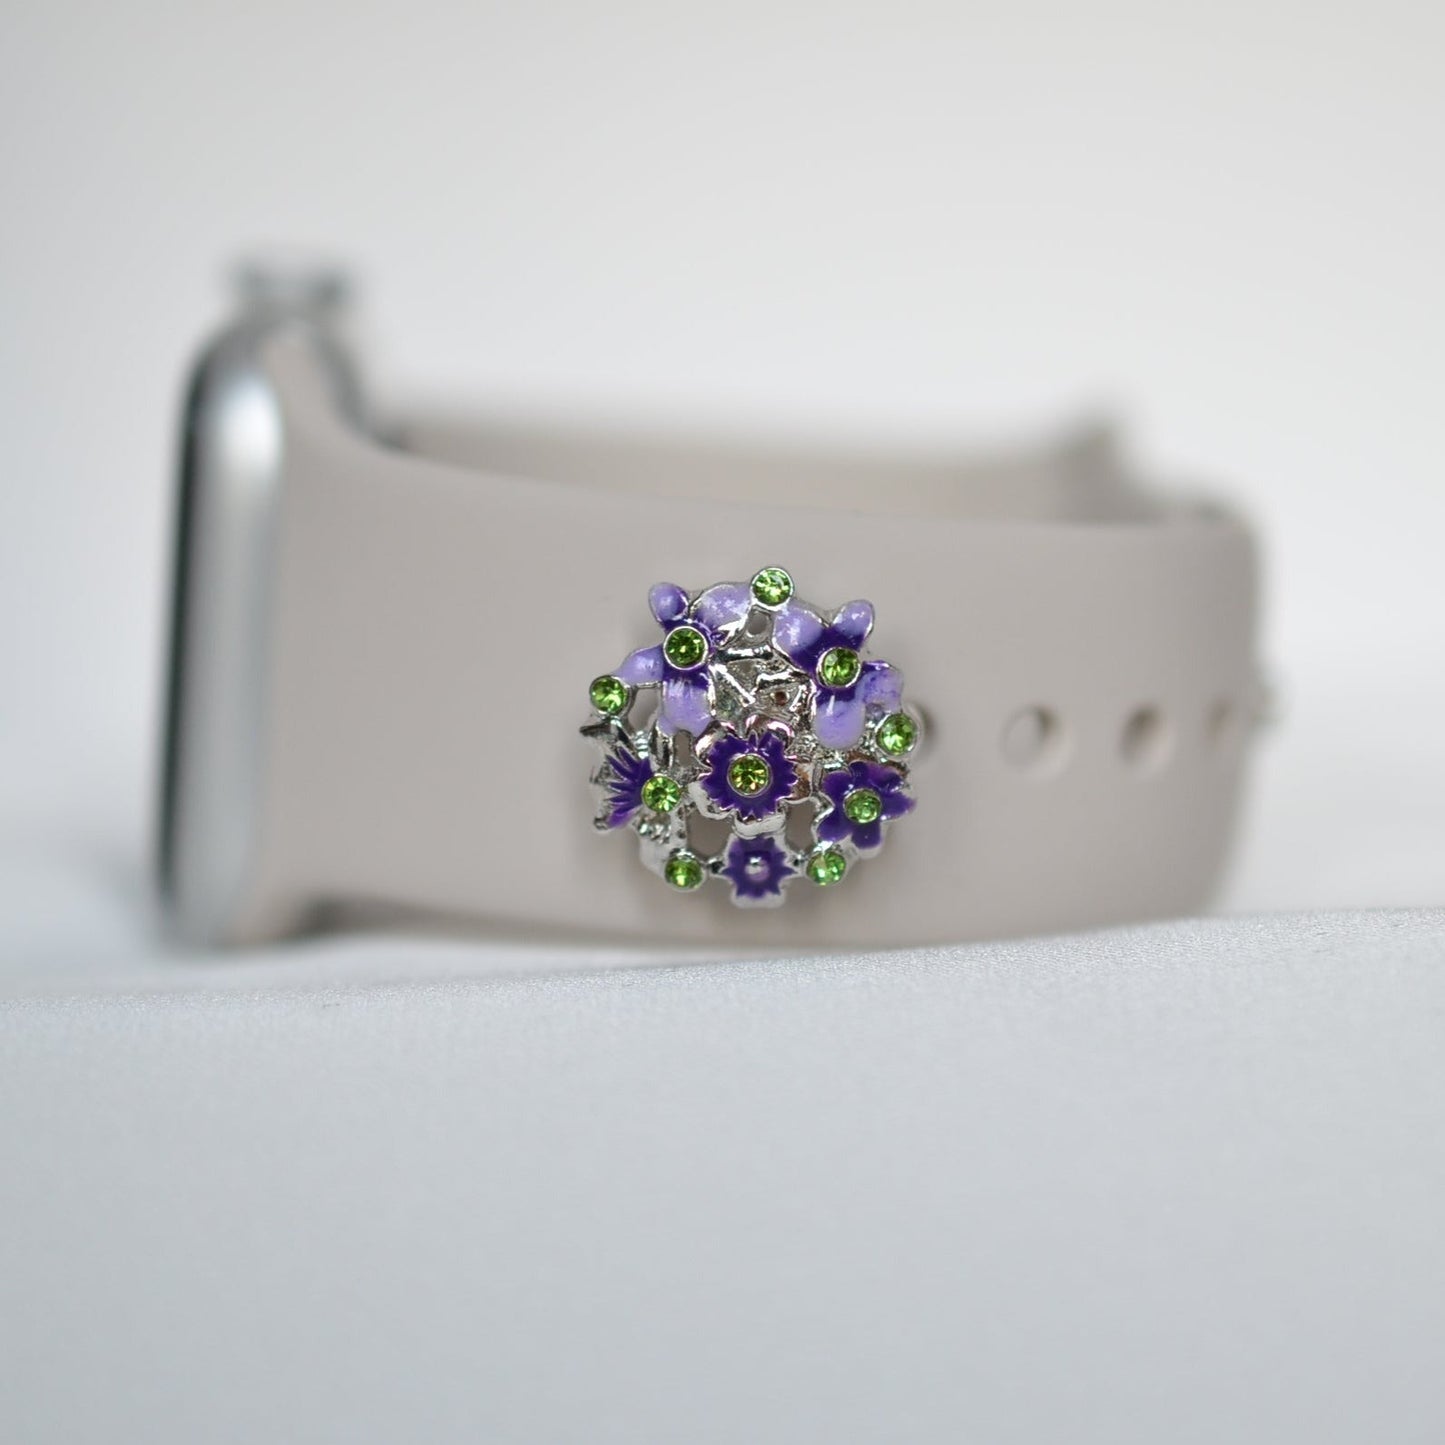 Purple Flower Charm with Green Leafs for belts, bags and watch band charms